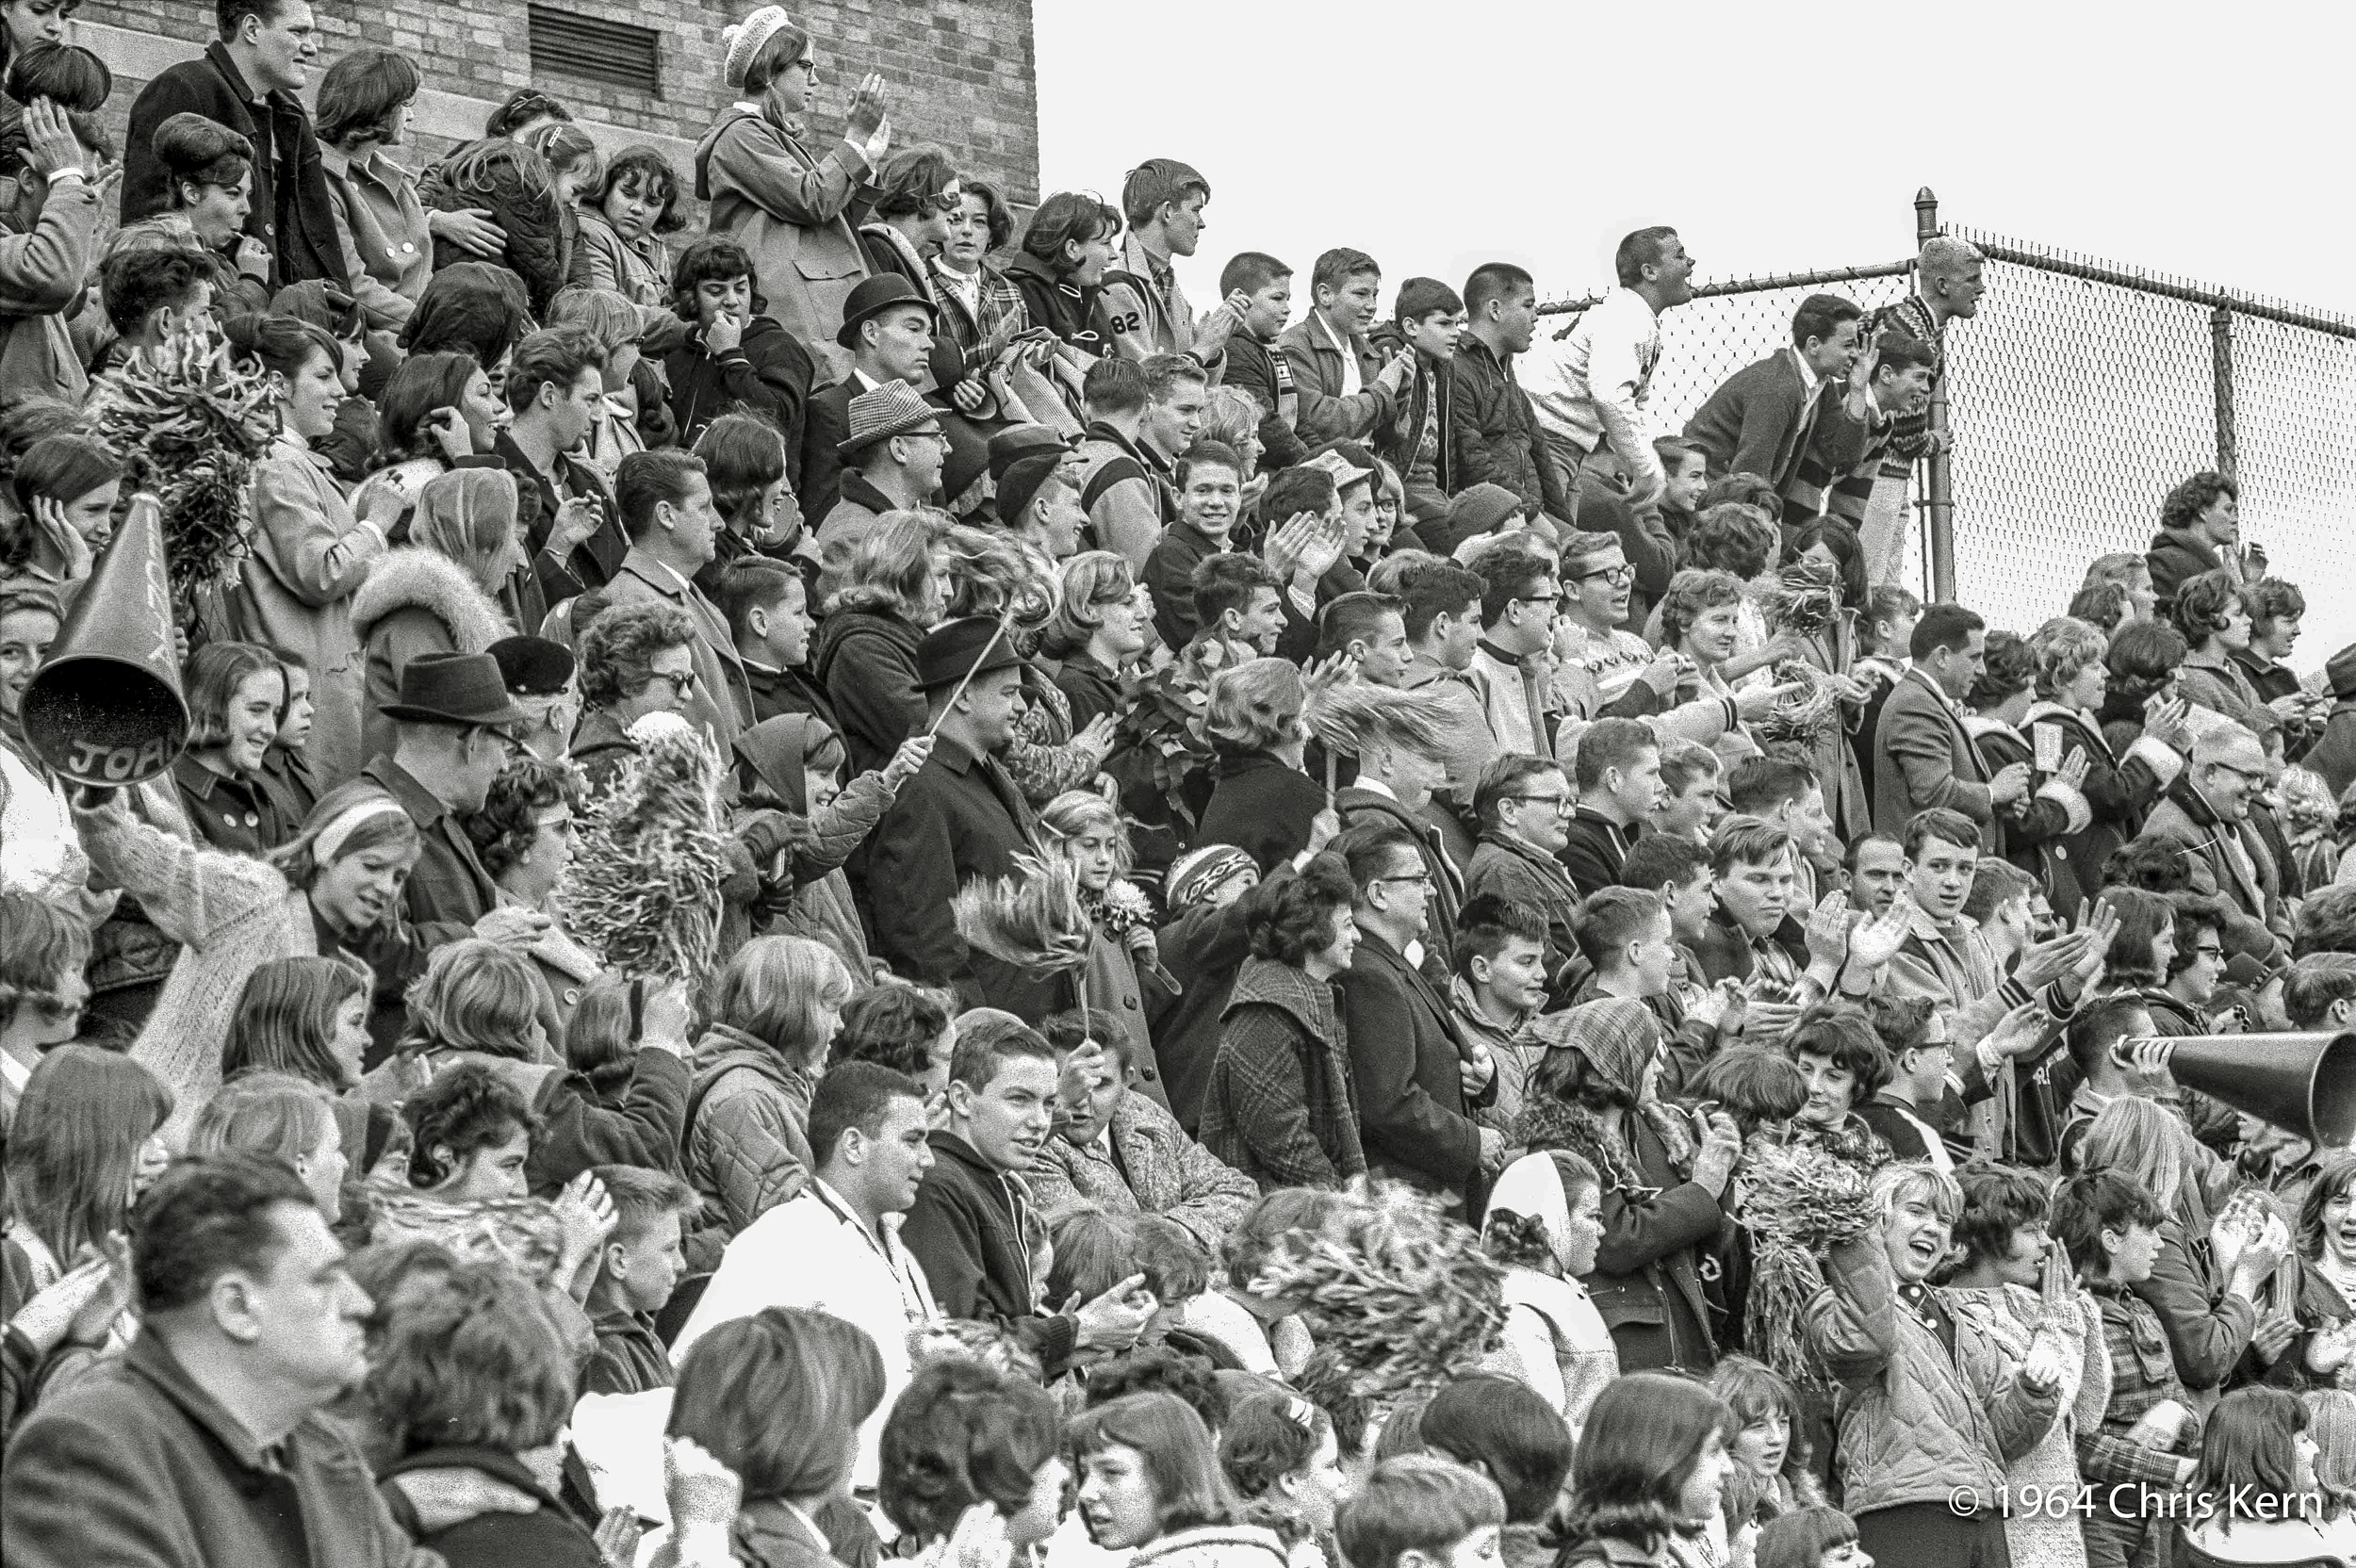 Autumn 1964. Football fans at Leonia High School in Leonia, New Jersey. 35mm negative taken by me. View full size.